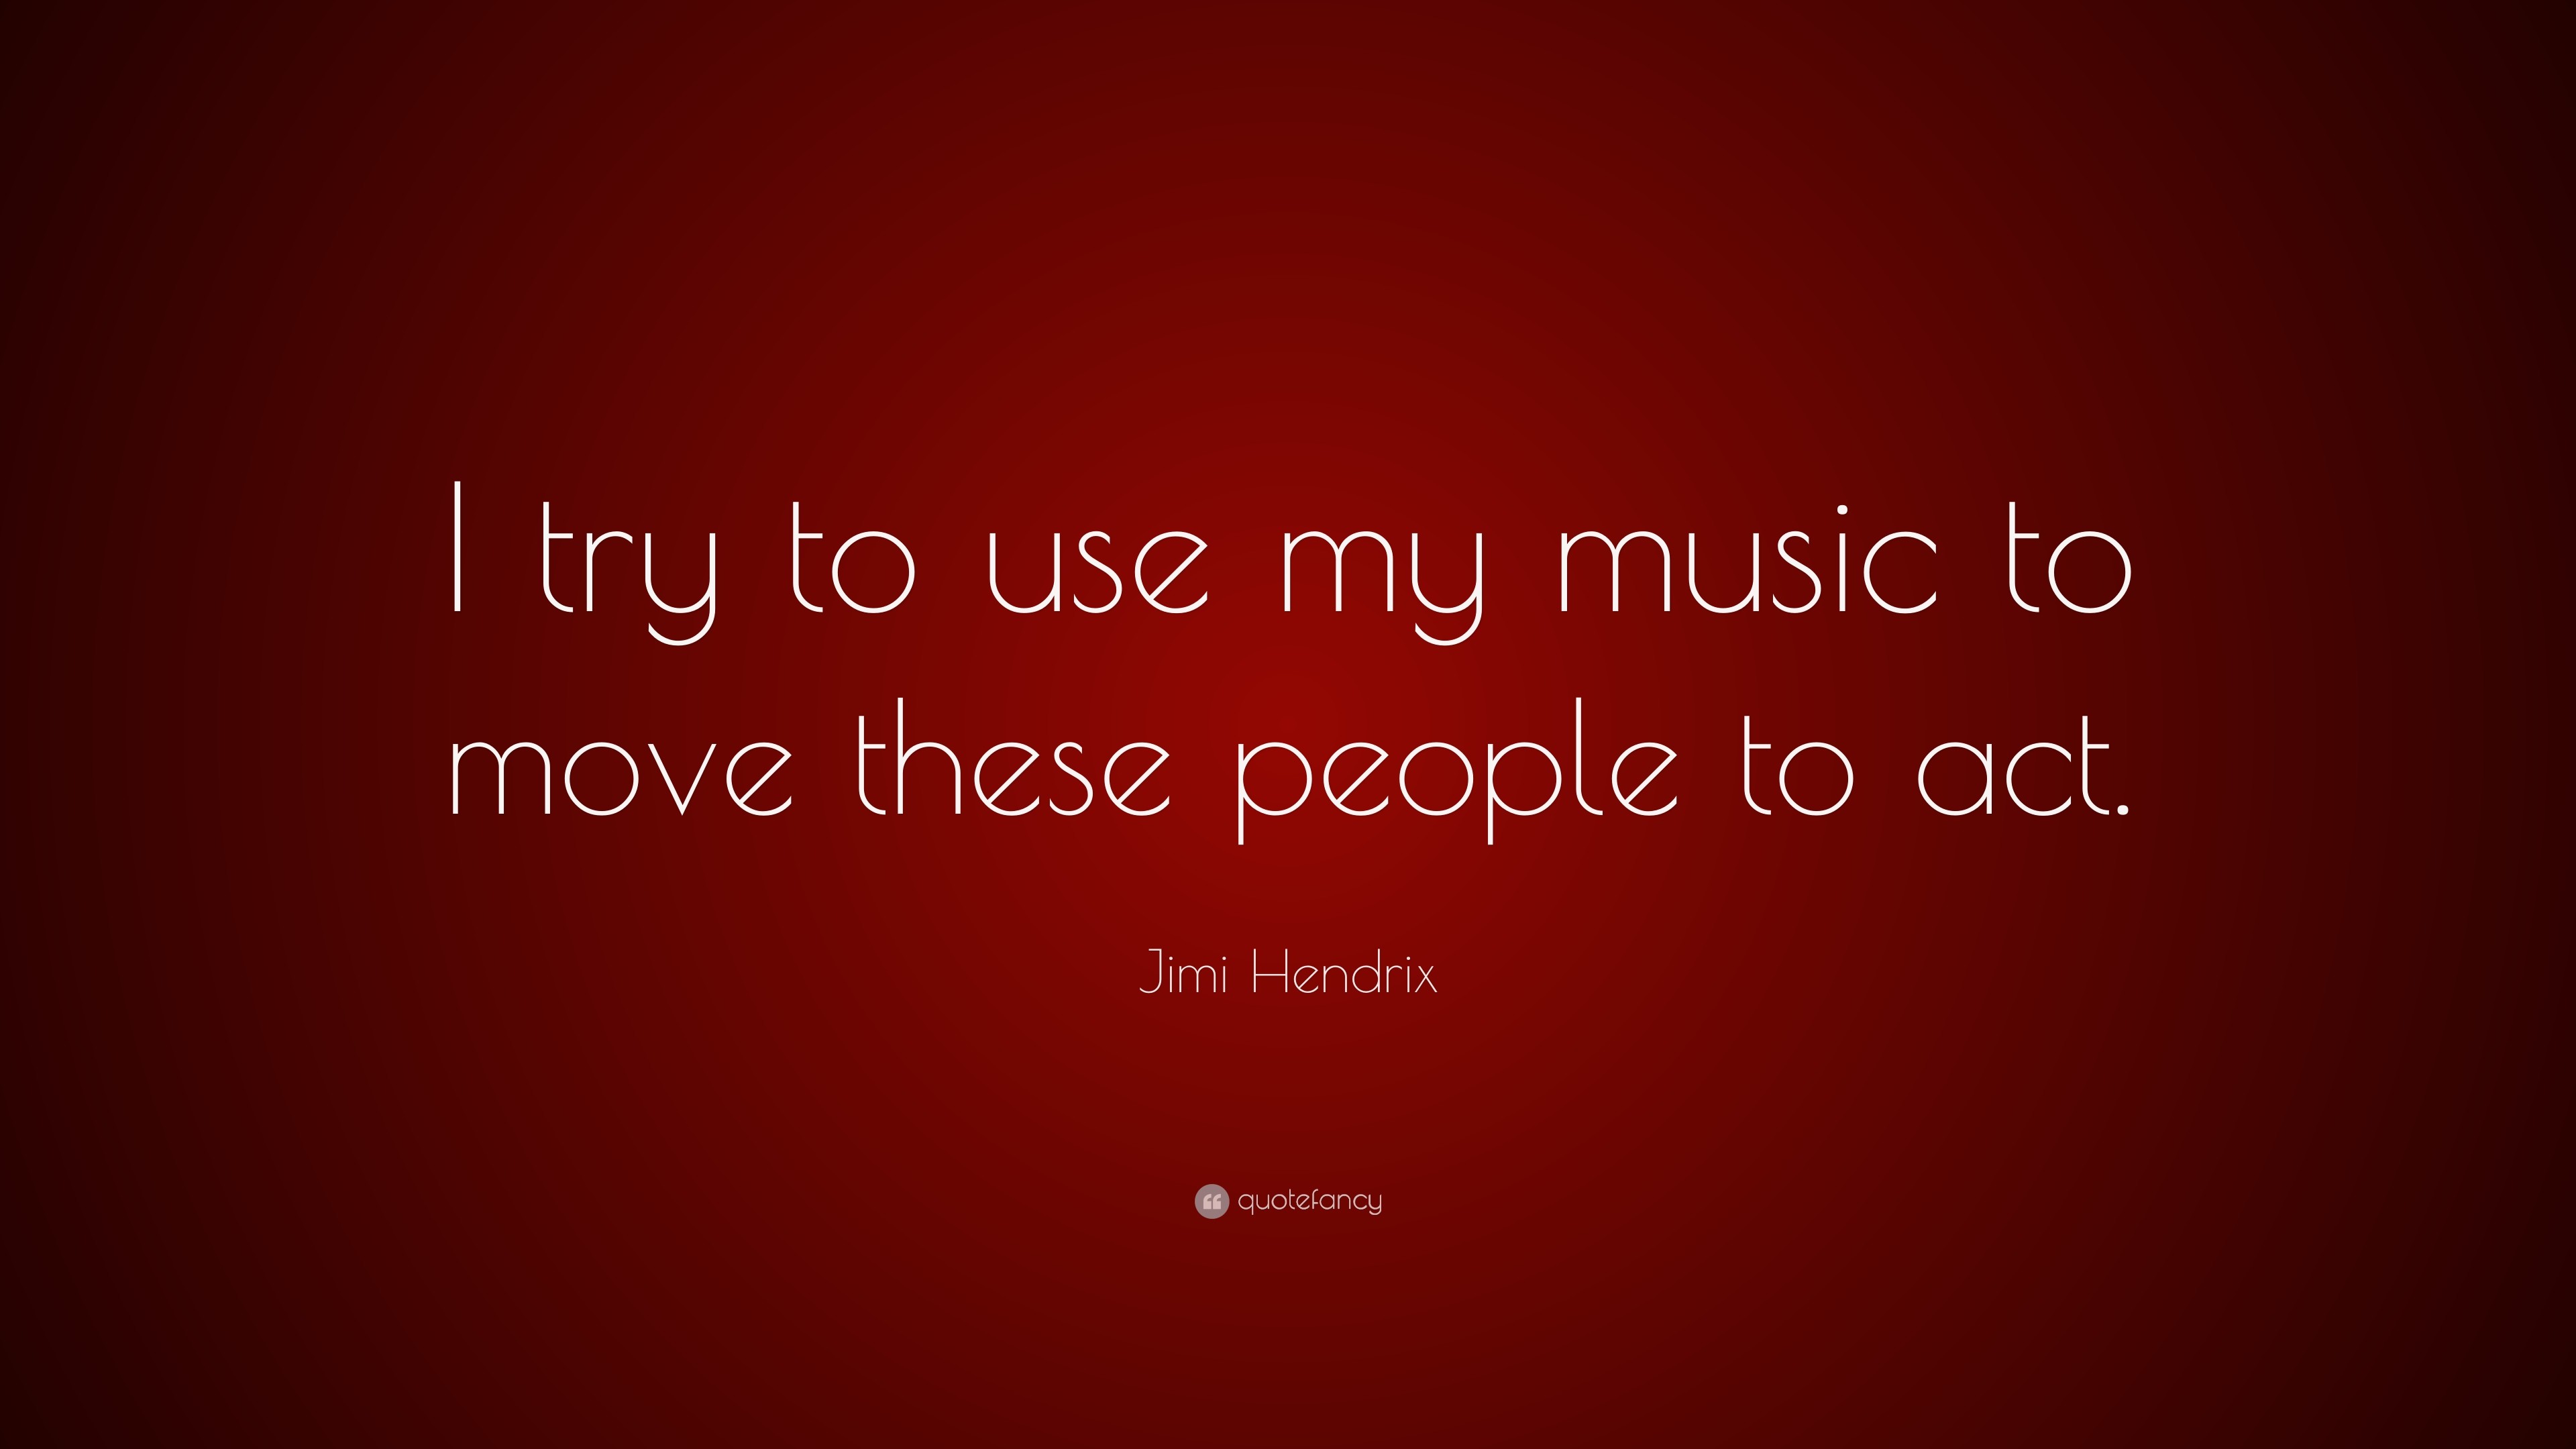 3840x2160 Jimi Hendrix Quote: “I try to use my music to move these people to